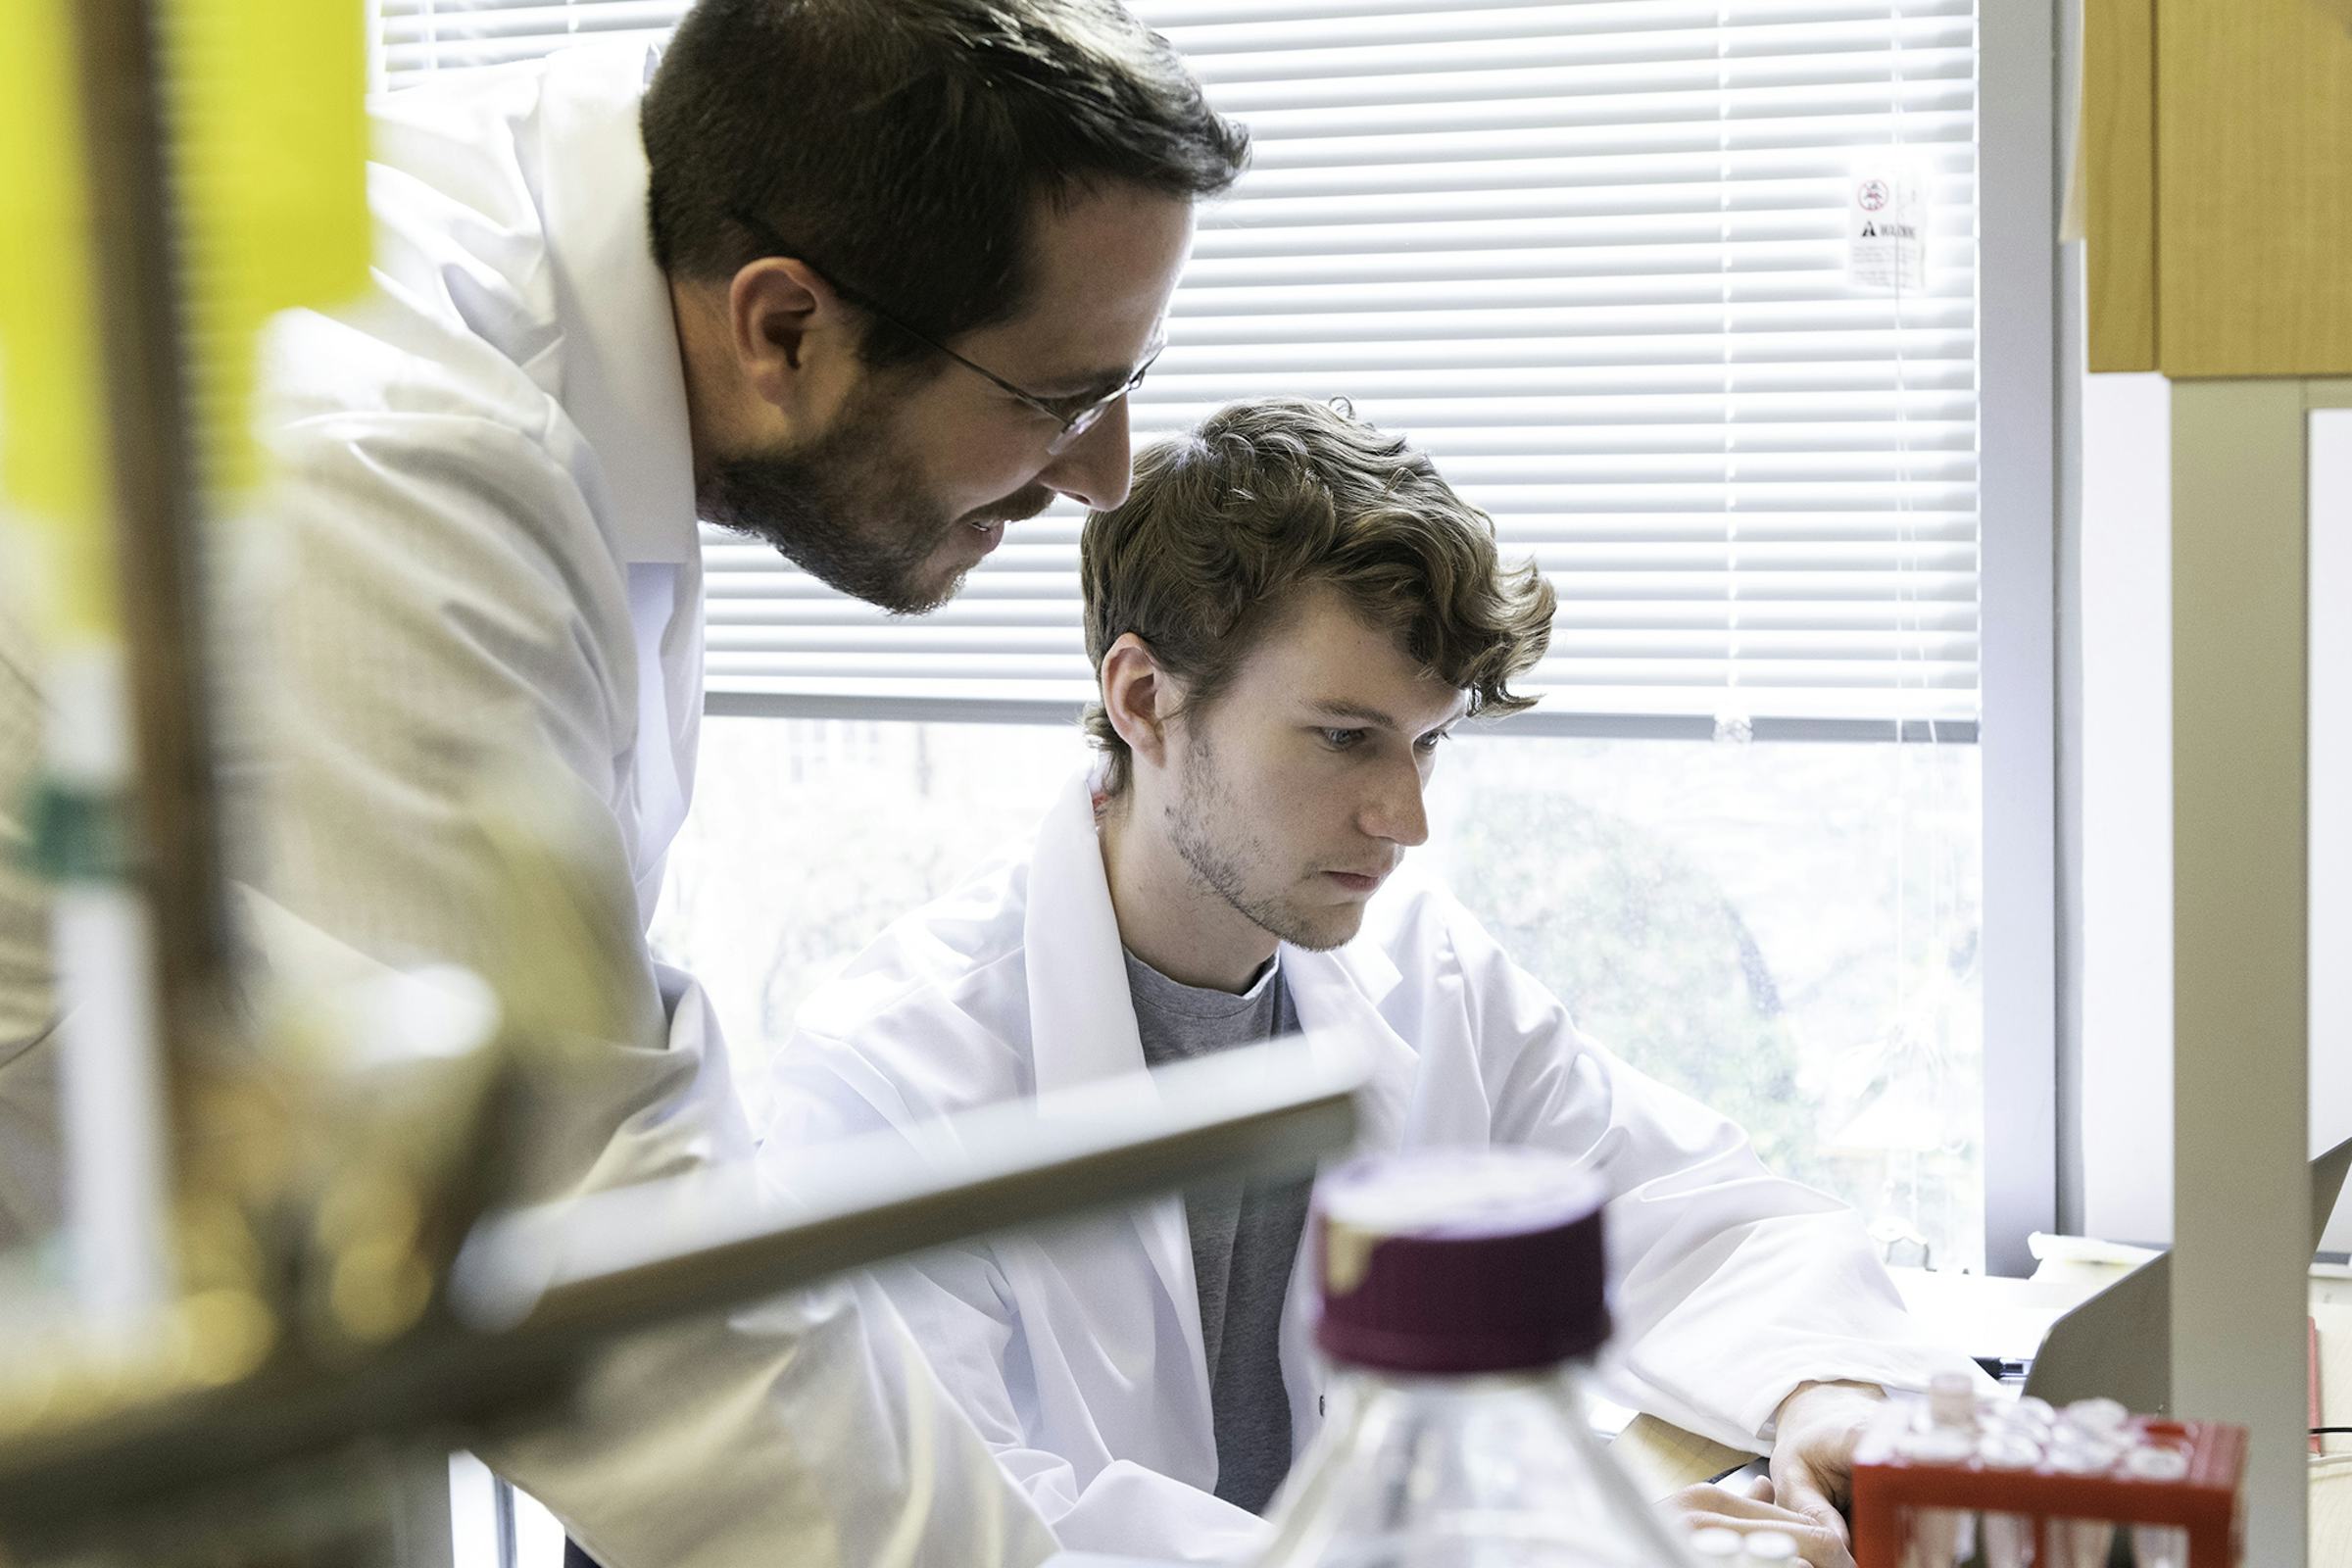 Two scientists, Jason McLellan and Daniel Wrapp, in white lab coats working in the lab